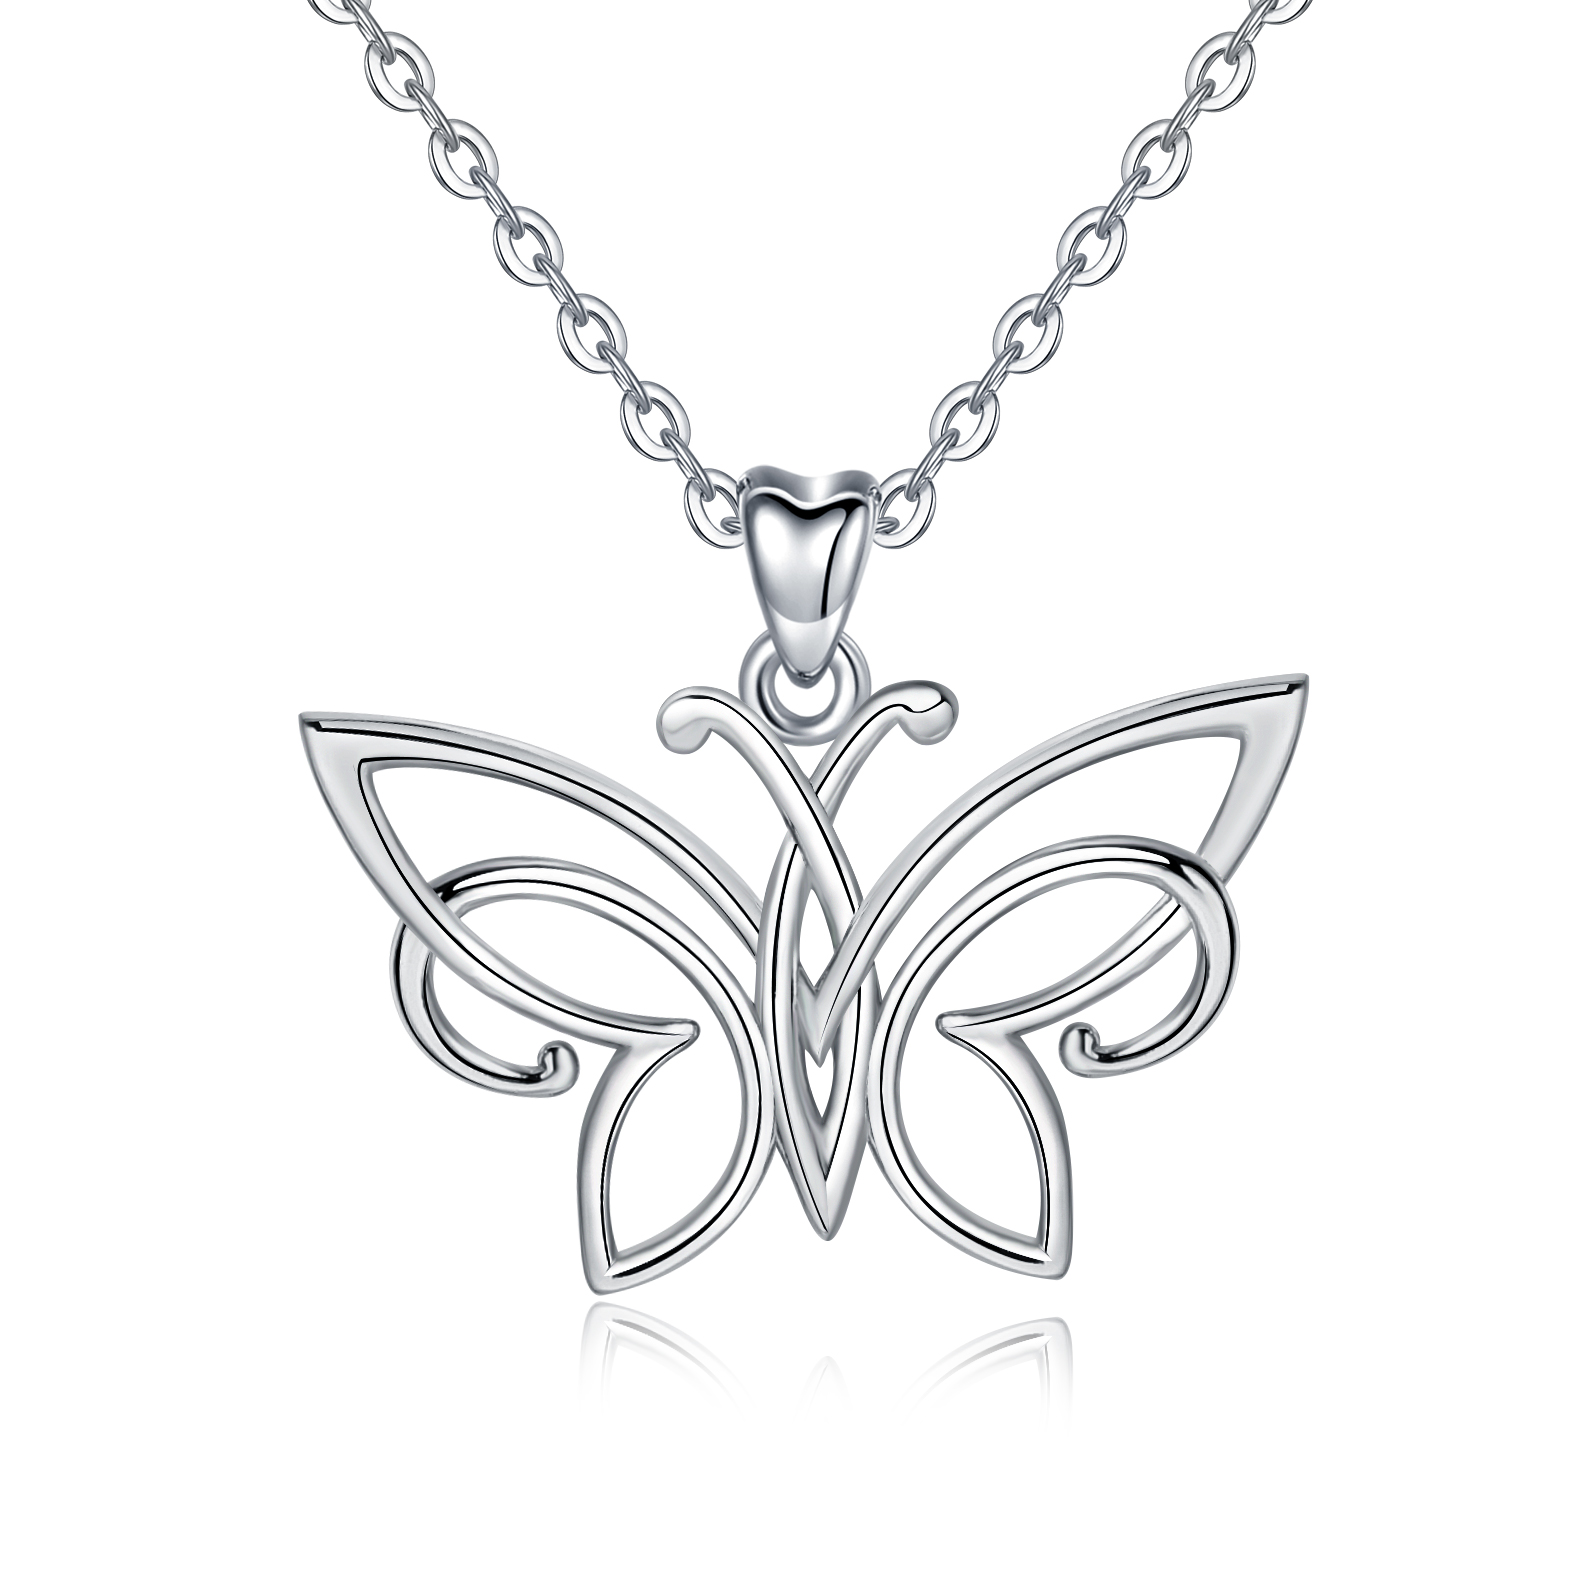 Merryshine Jewelry Elegant S925 Sterling Silver Hollow Out Butterfly Pendant Necklace